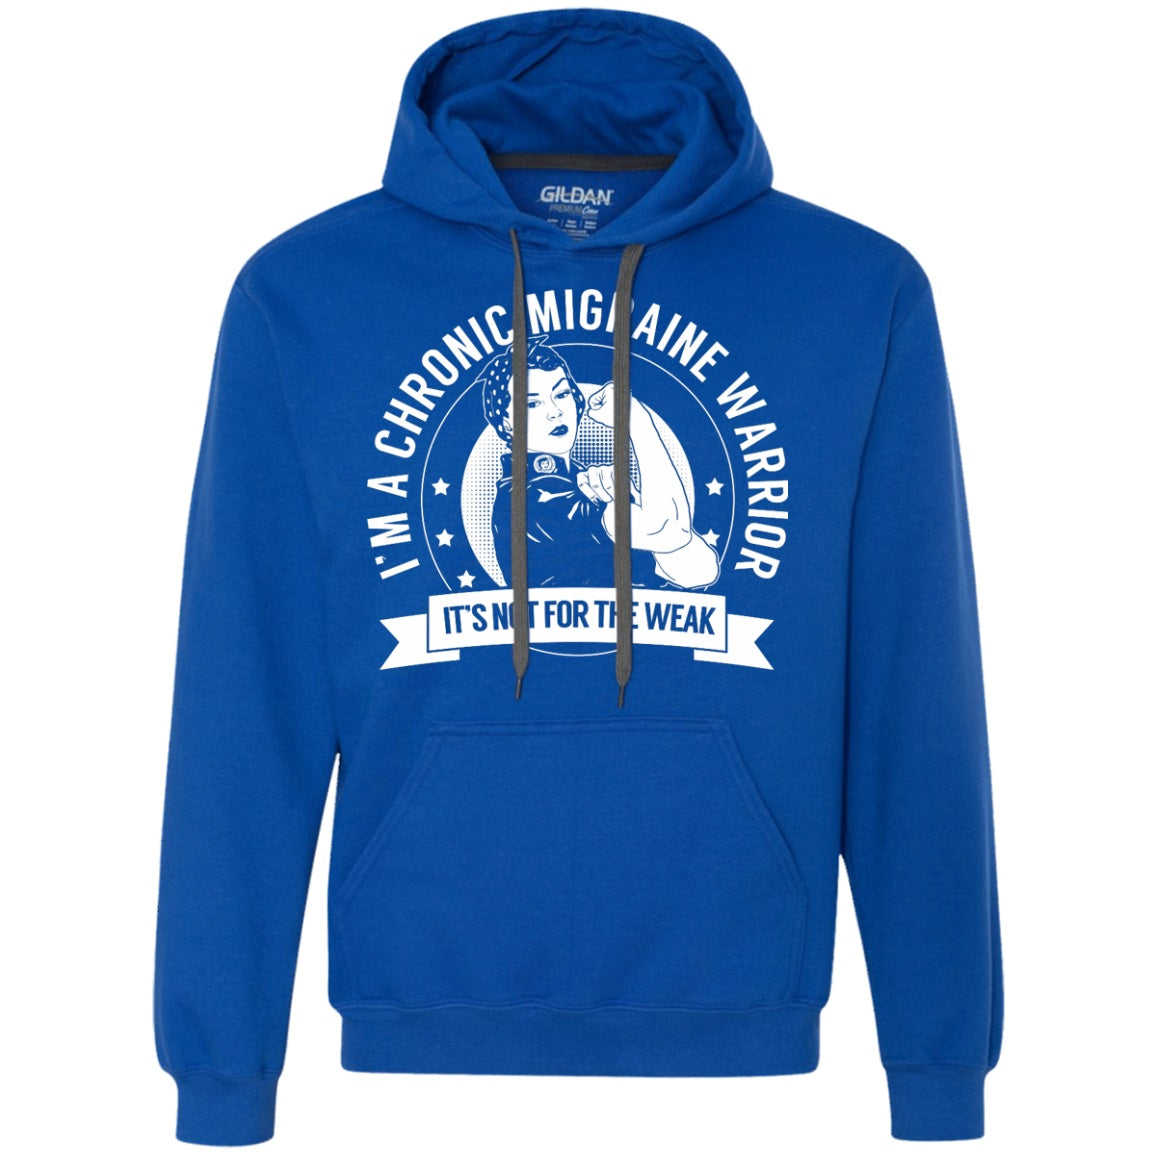 Chronic Migraine Warrior Not For The Weak Pullover Hoodie - The Unchargeables